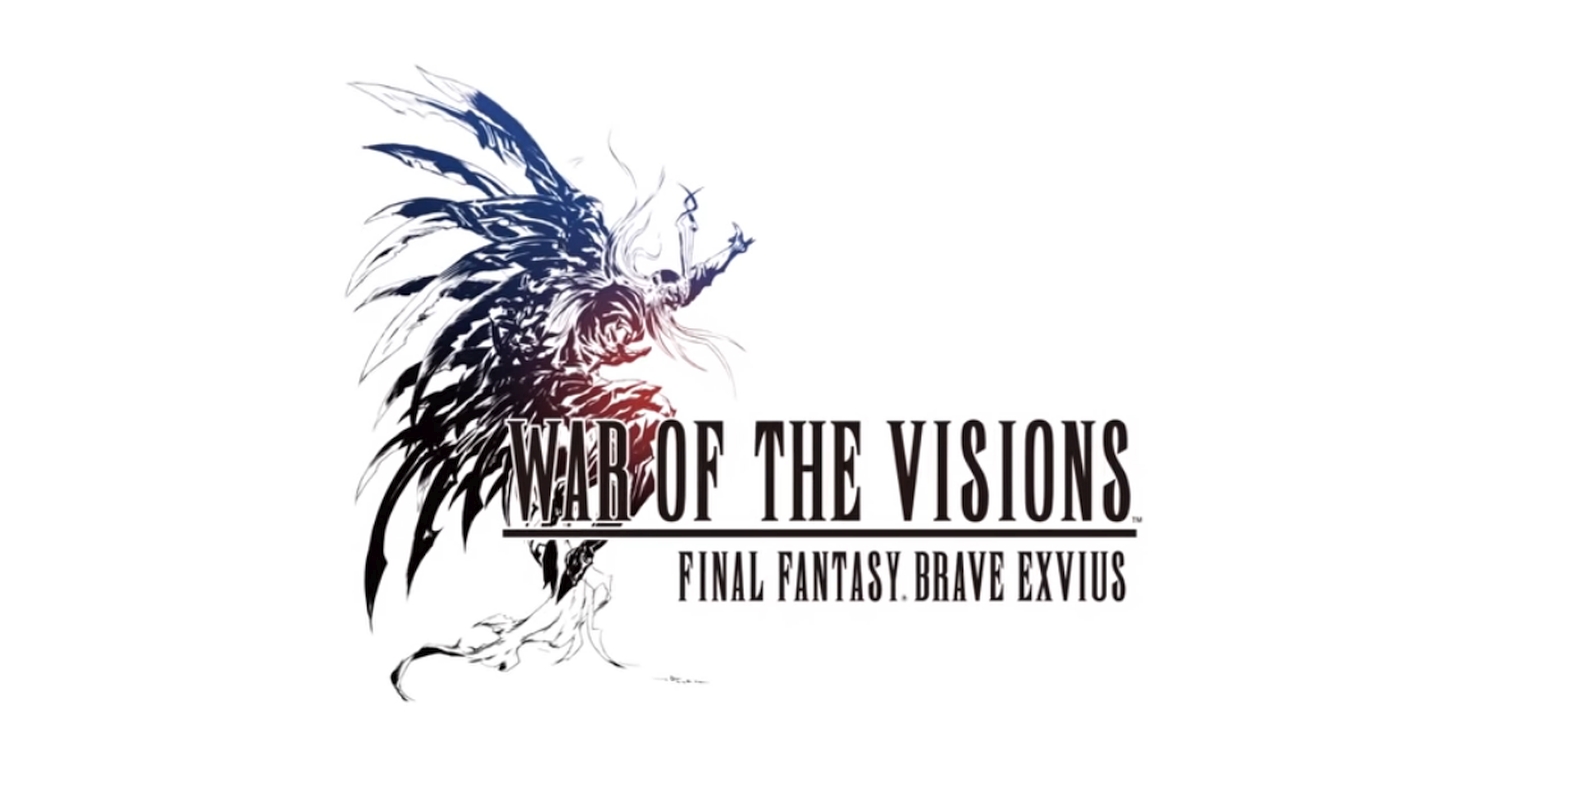 War of the Visions: Final Fantasy Brave Exvius Pre-Registration And Release Window Announced